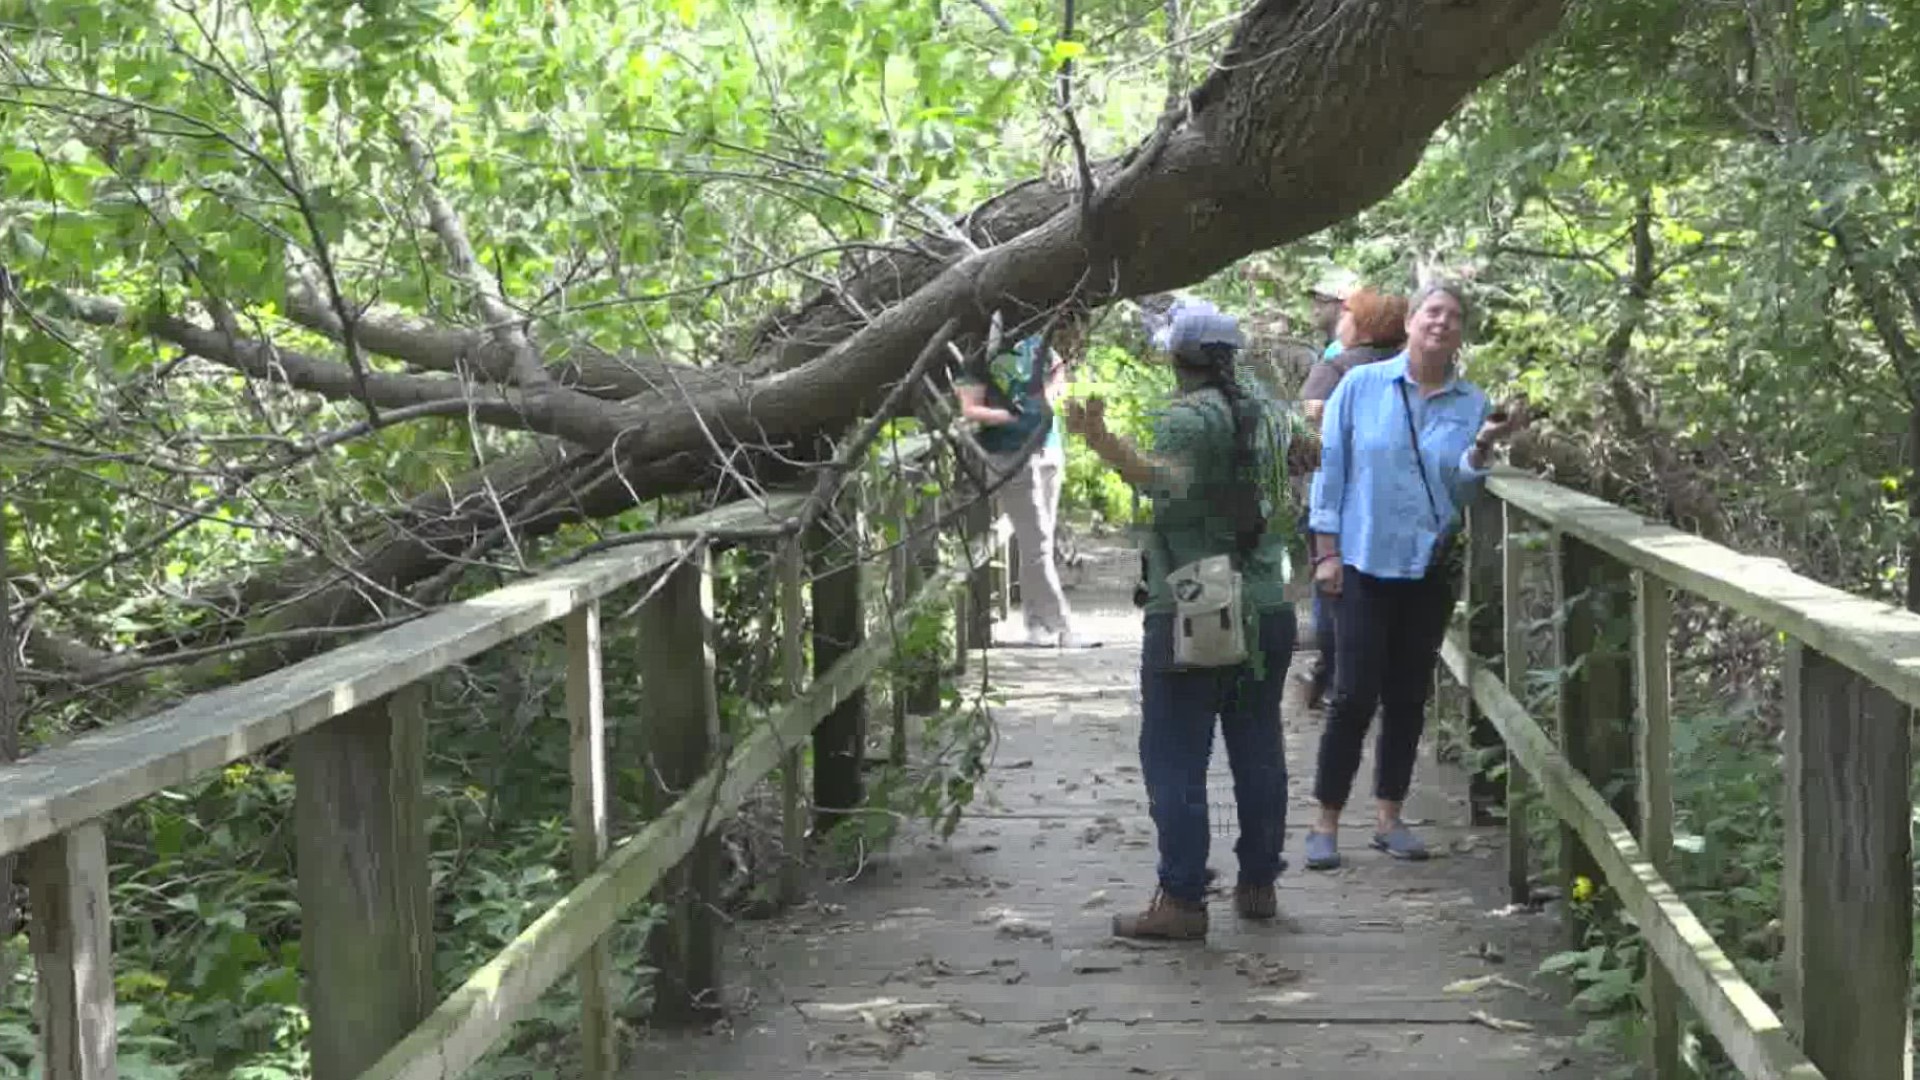 Rough weather last month did so much damage that the Magee Marsh Wildlife Area had to be shut down due to safety concerns. But not all was lost.